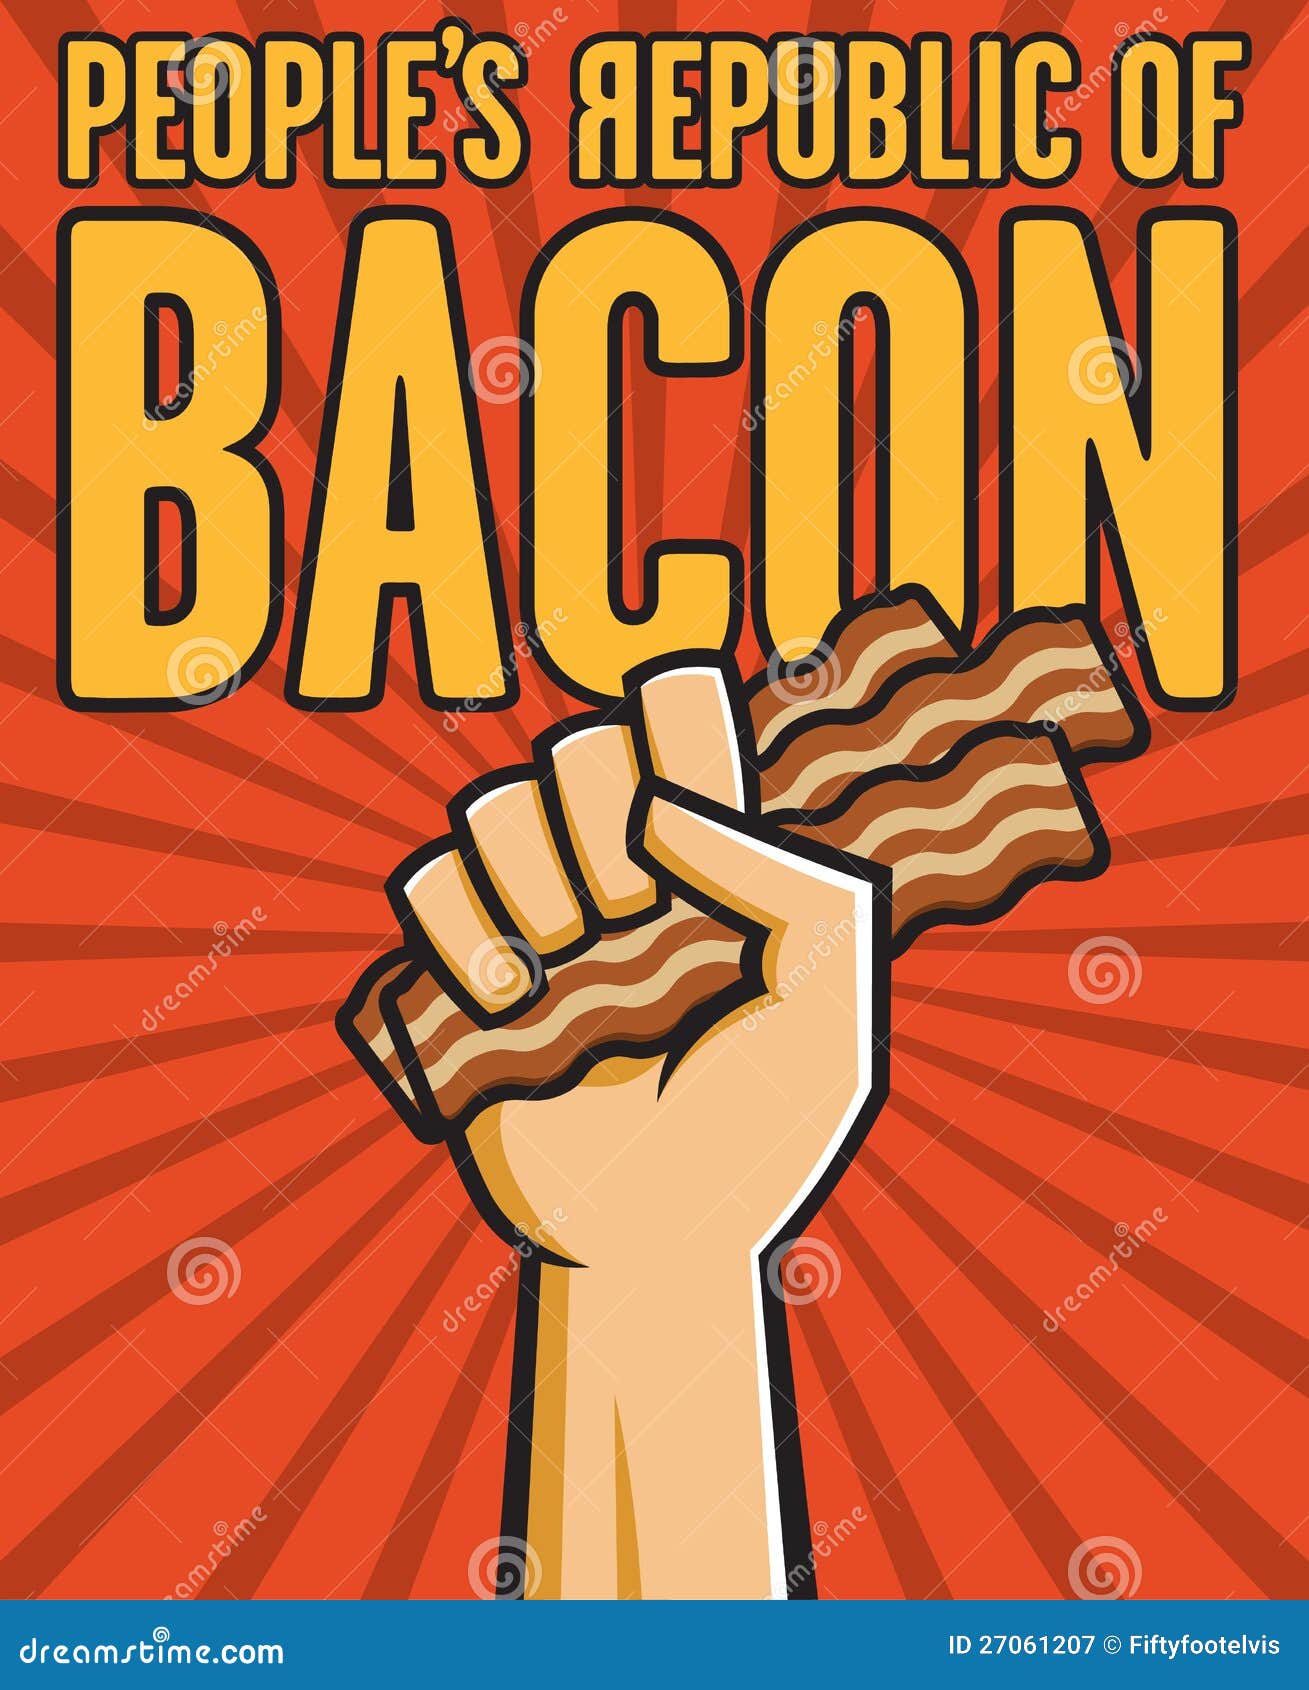 Peoples Republic of Bacon stock vector. Illustration of communist - 27061207